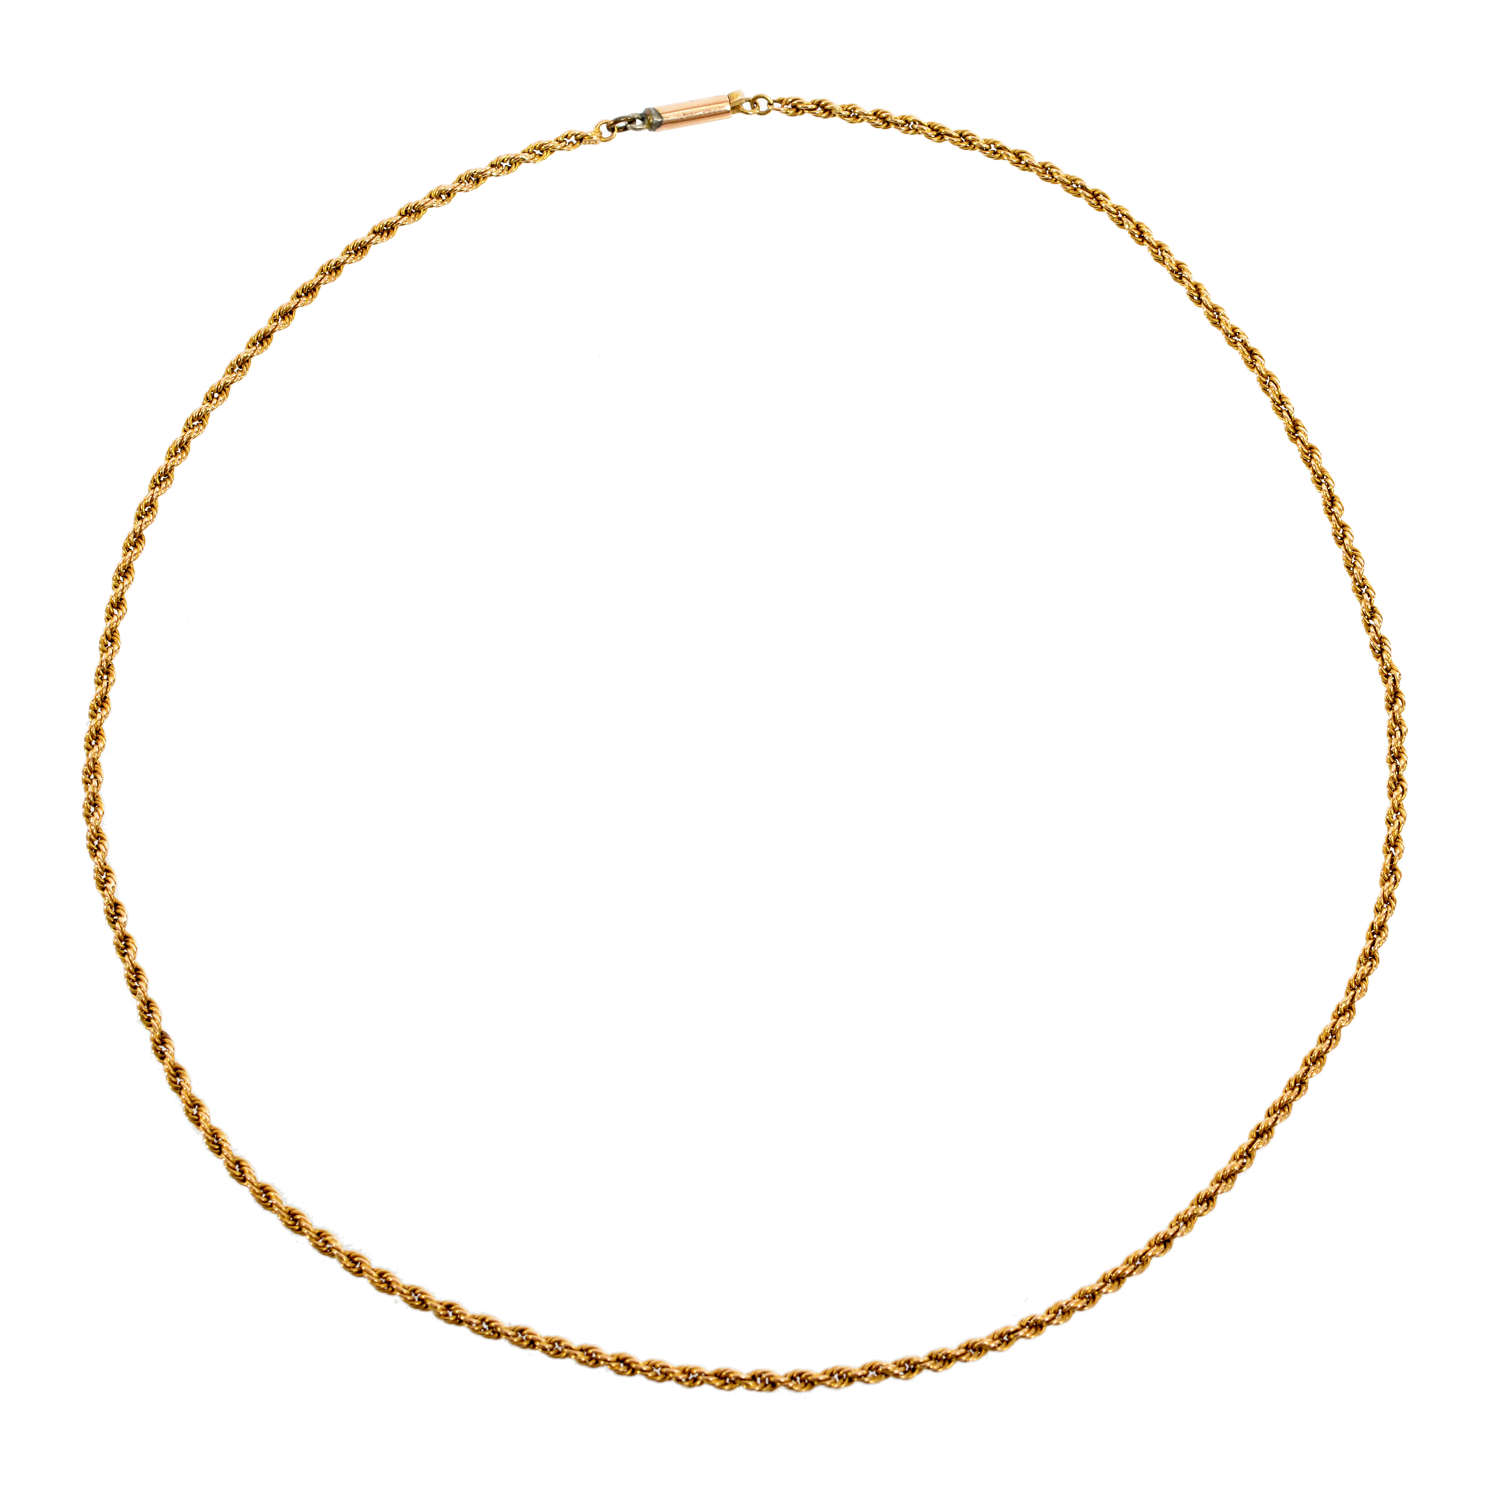 An Edwardian 15ct gold rope link neck chain